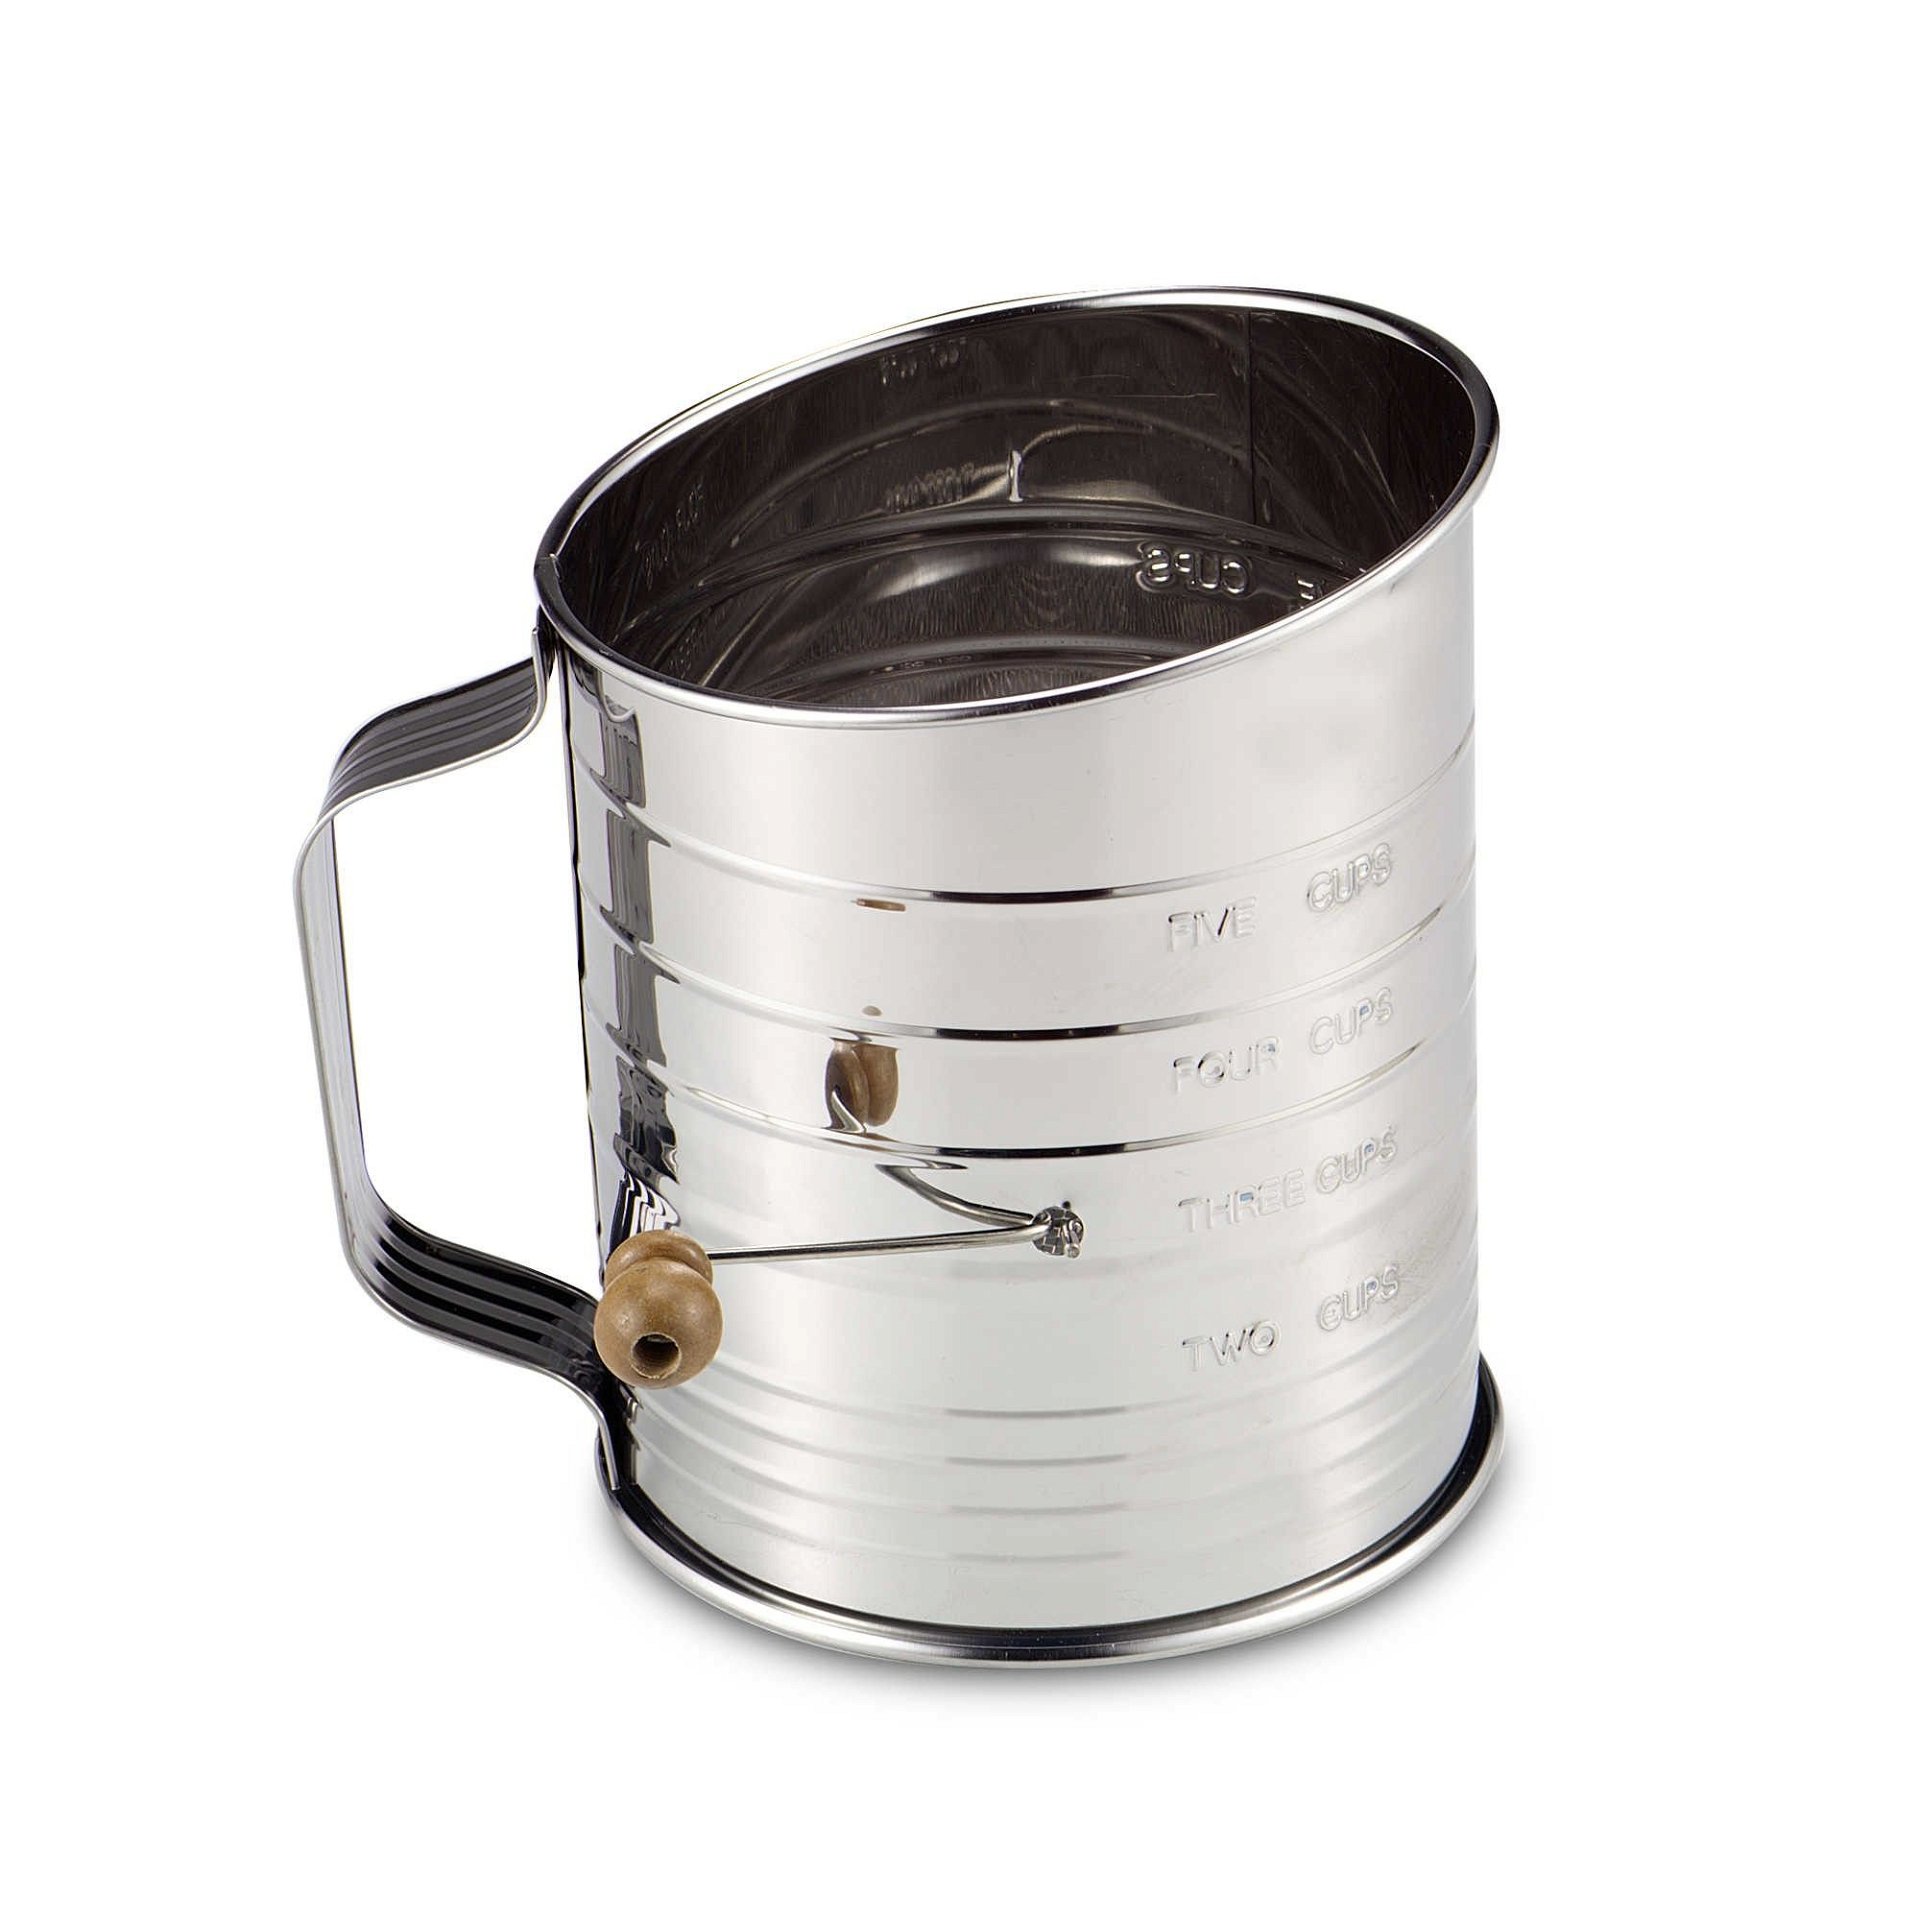 Stainless Steel Crank Sifter 3 Cup